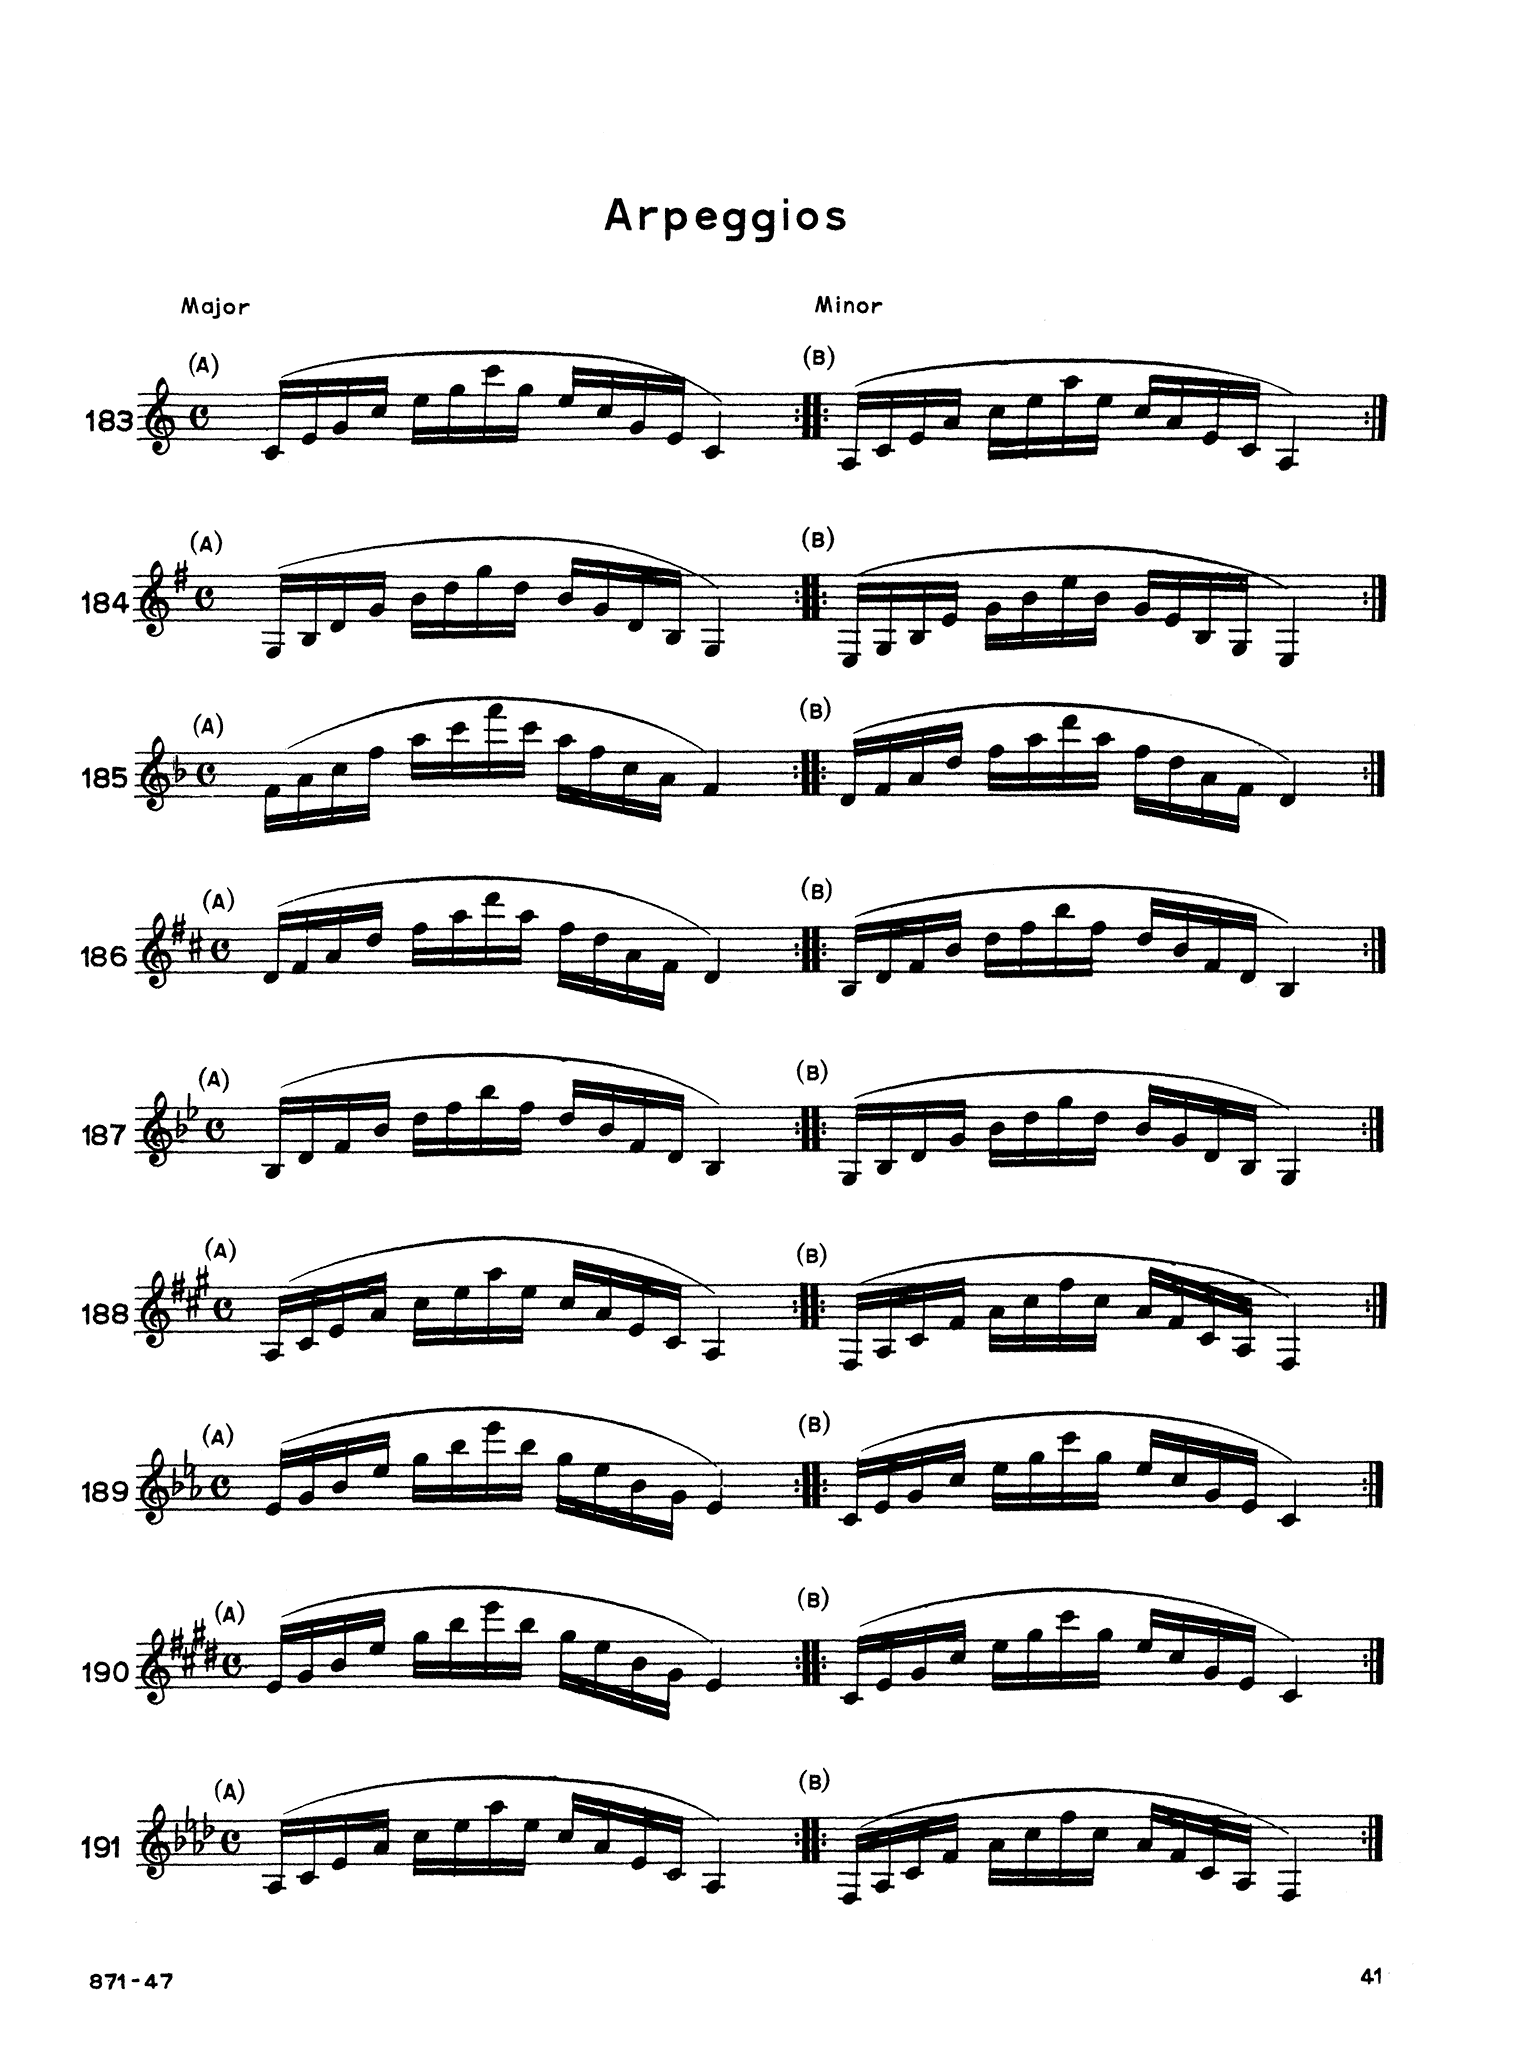 Parès Daily Exercises & Scales for Clarinet Rubank page 41